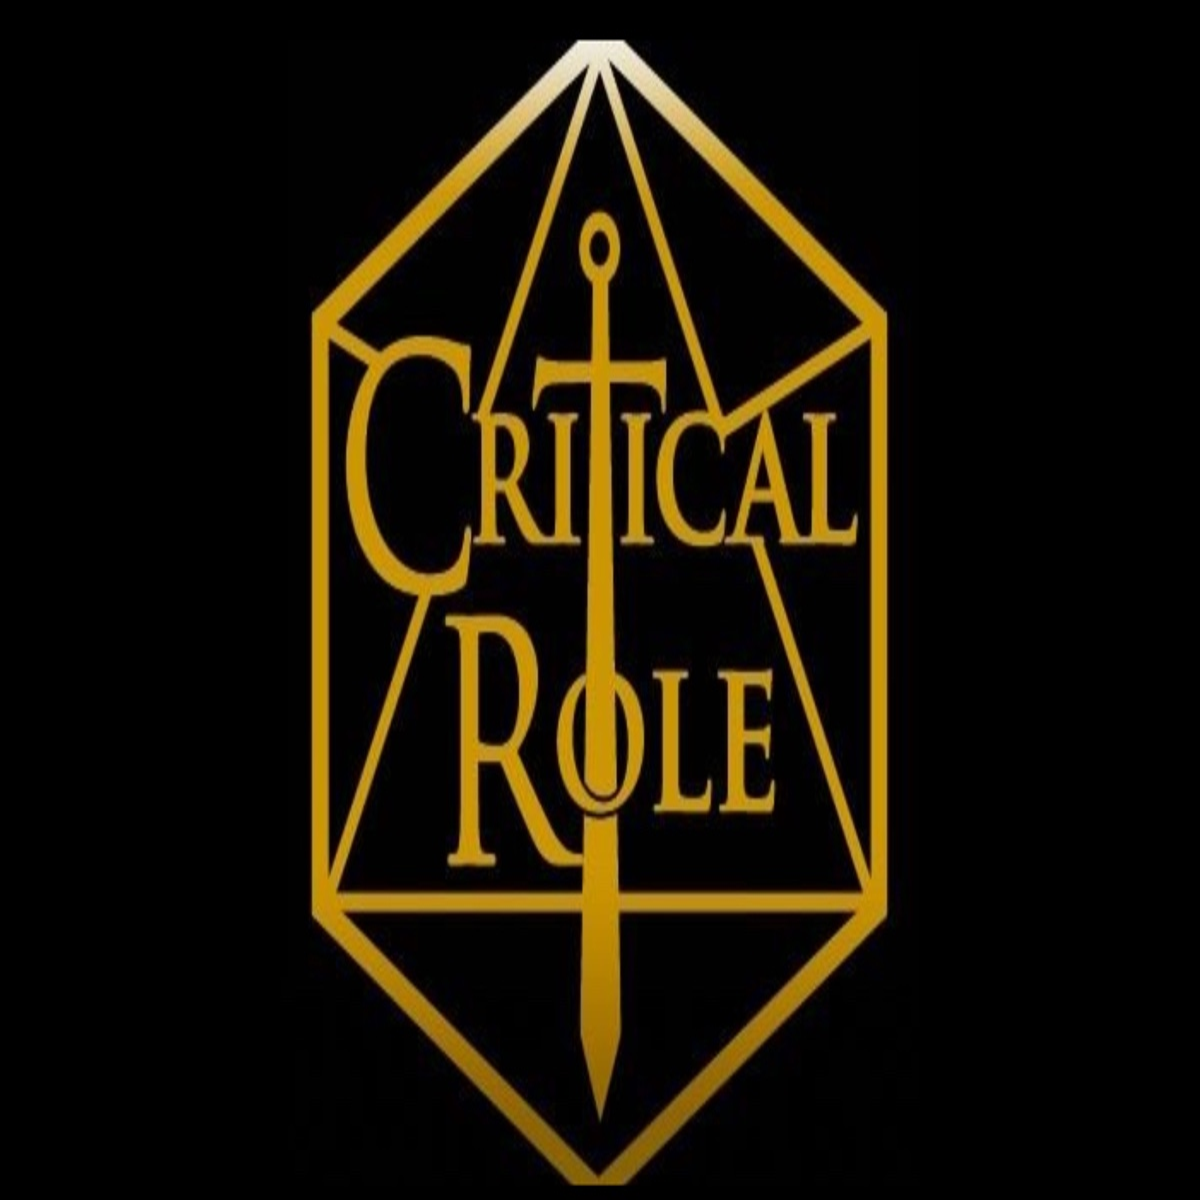 Critical Role 20-Sided Die – The Op Games